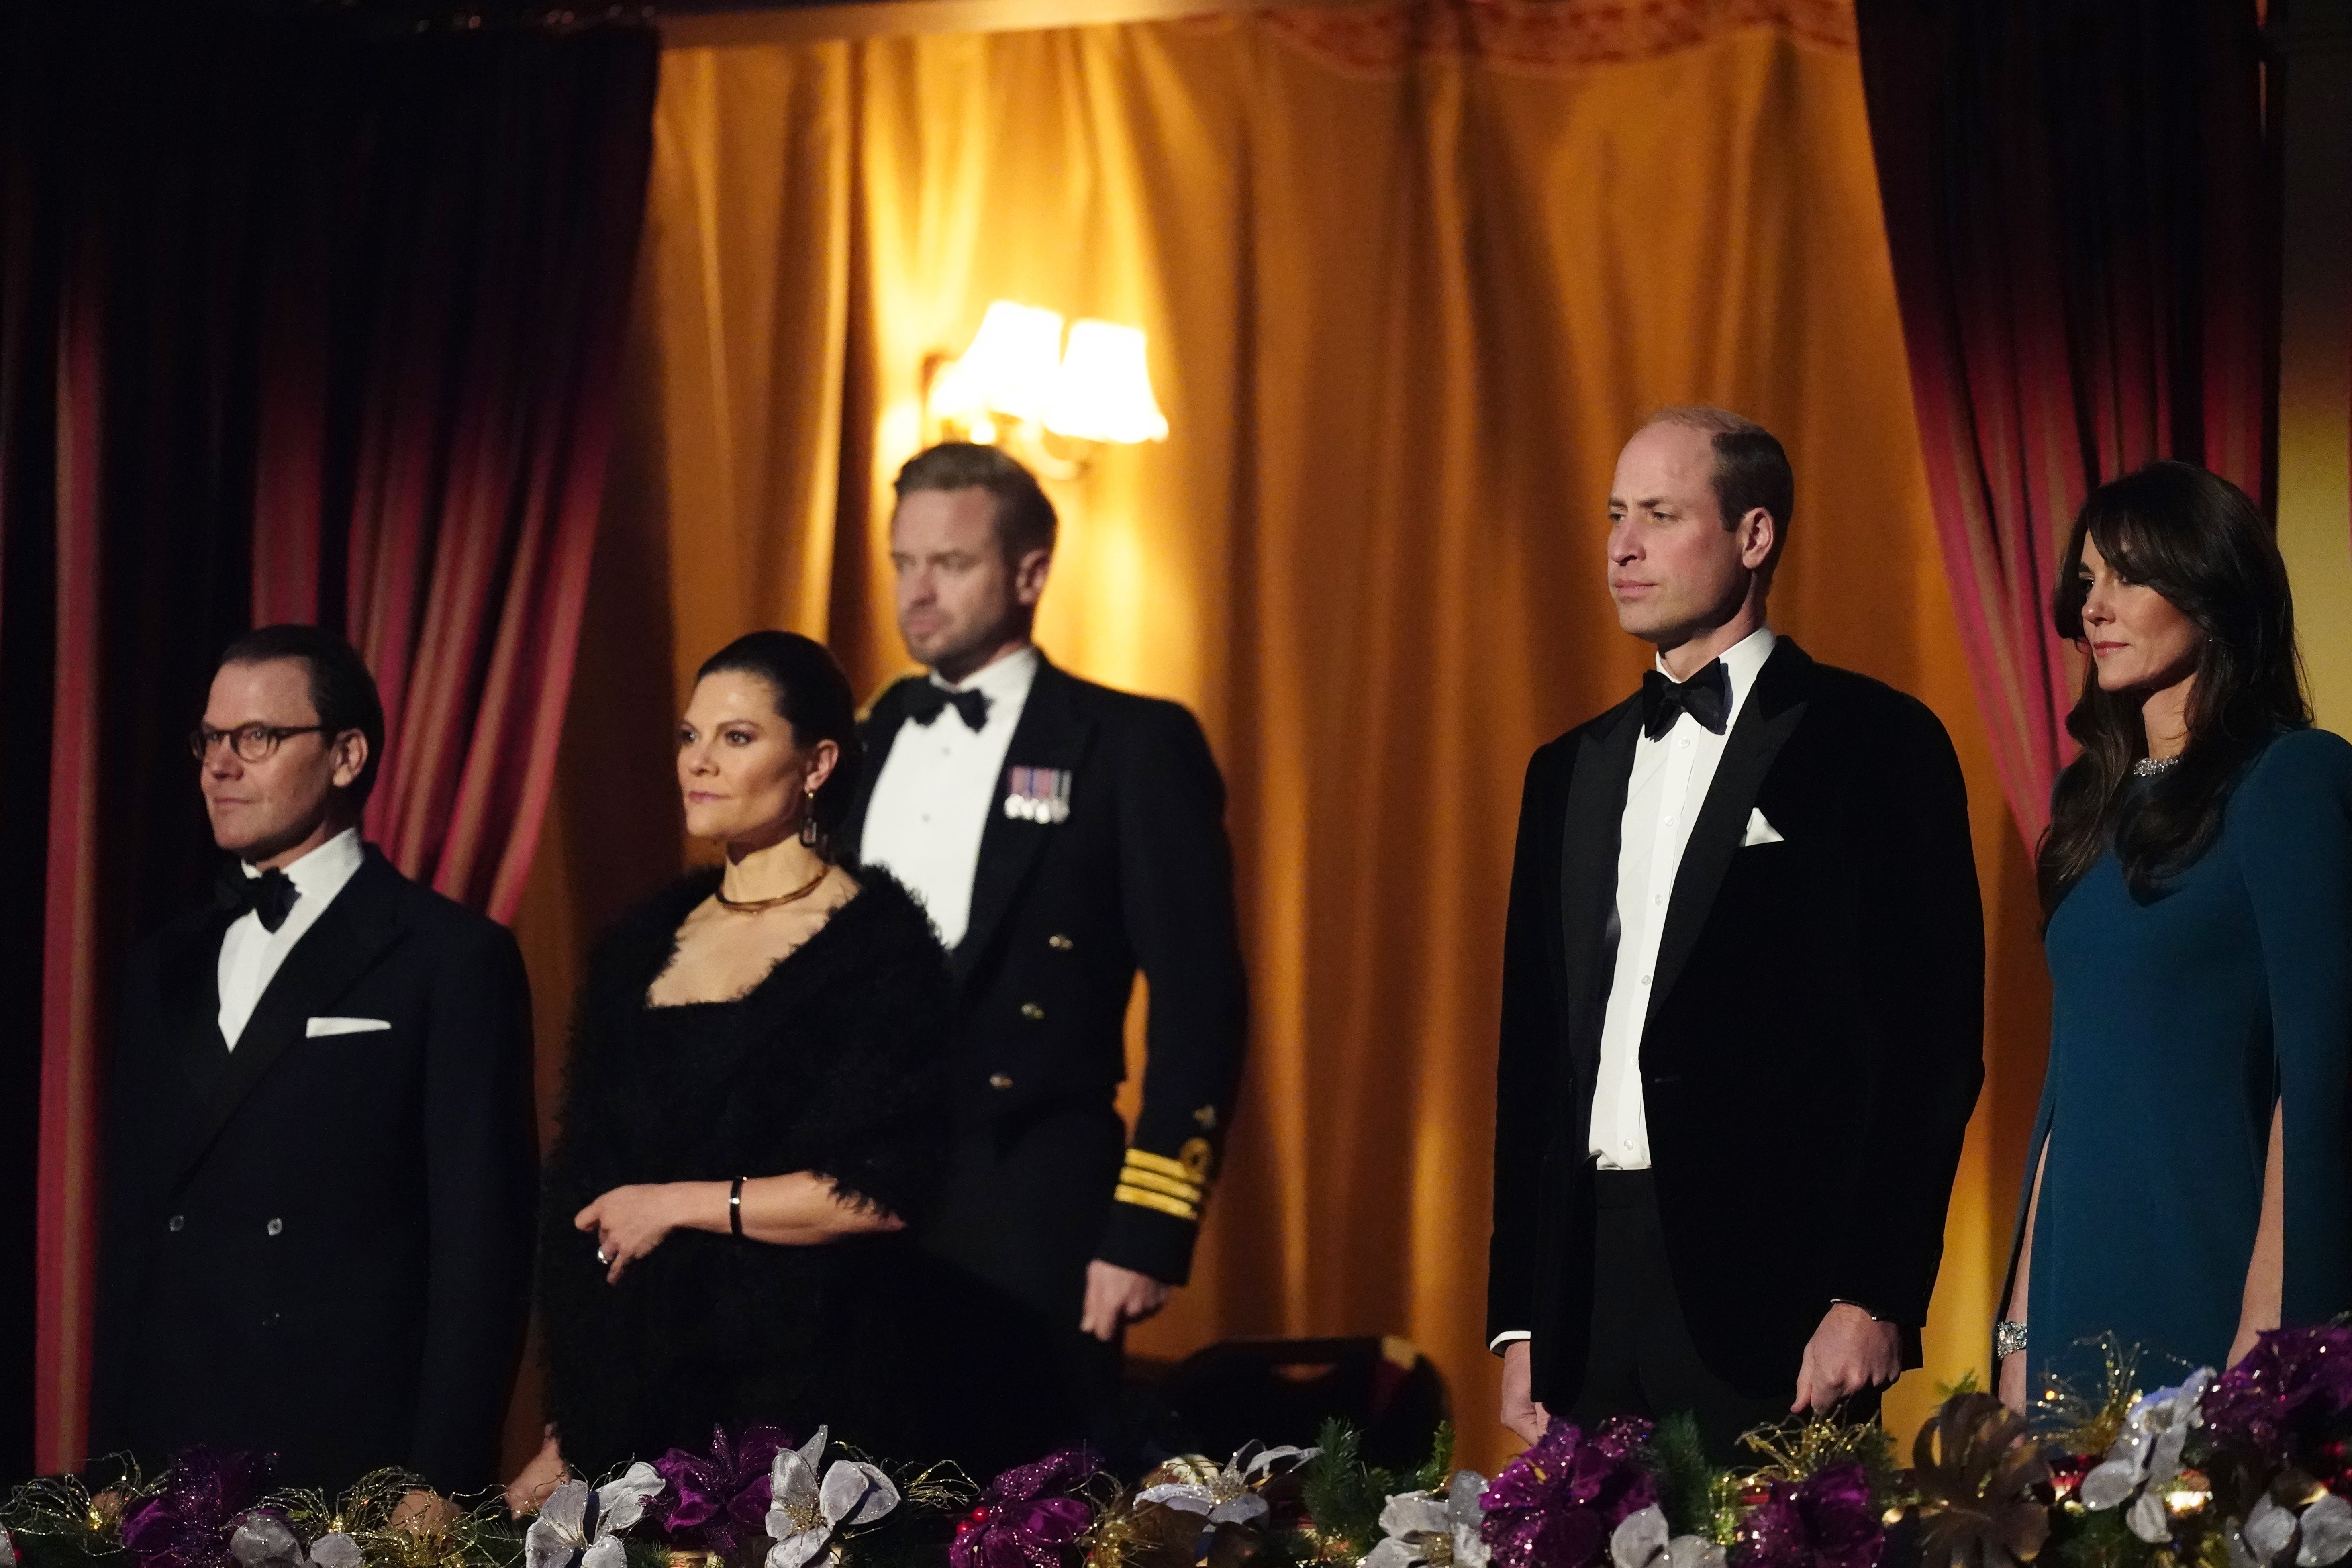 The couple stood for the National Anthem alongside Crown Princess Victoria and Prince Daniel of Sweden